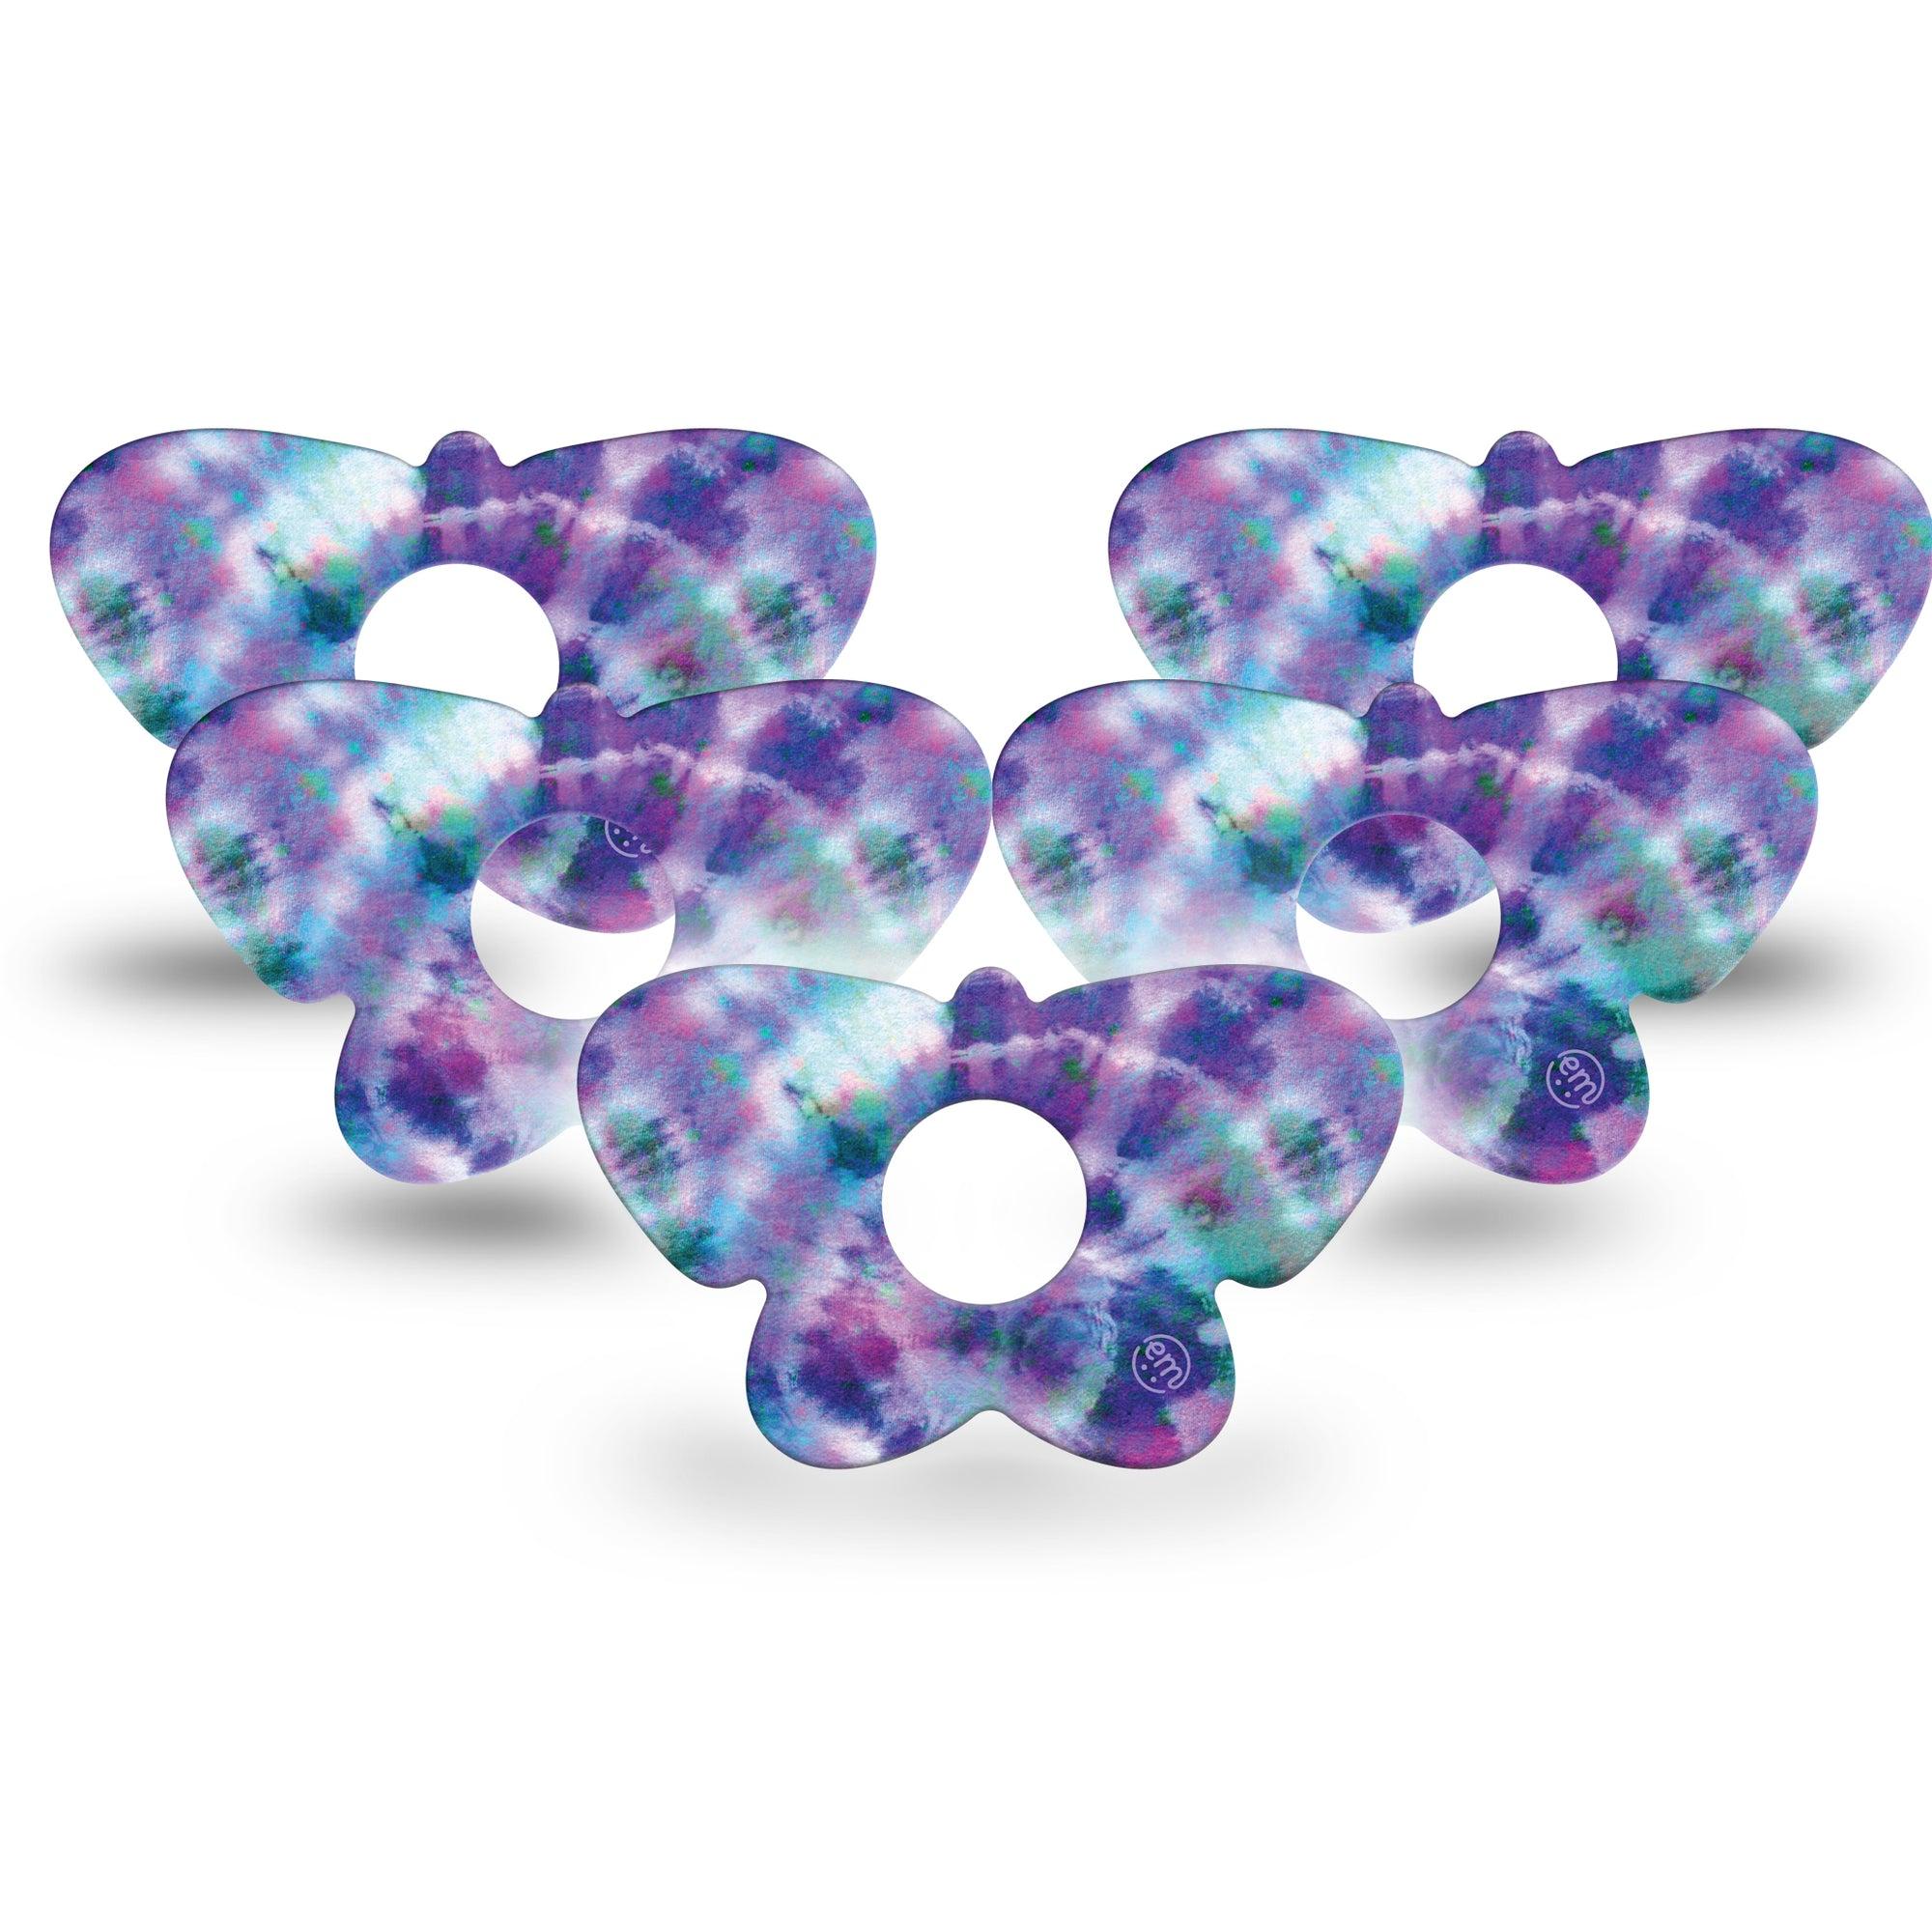 ExpressionMed Purple Tie Dye Butterfly Libre 3 Tape, 5-Pack, Decorative Dye Color Inspired, CGM Plaster Patch Design